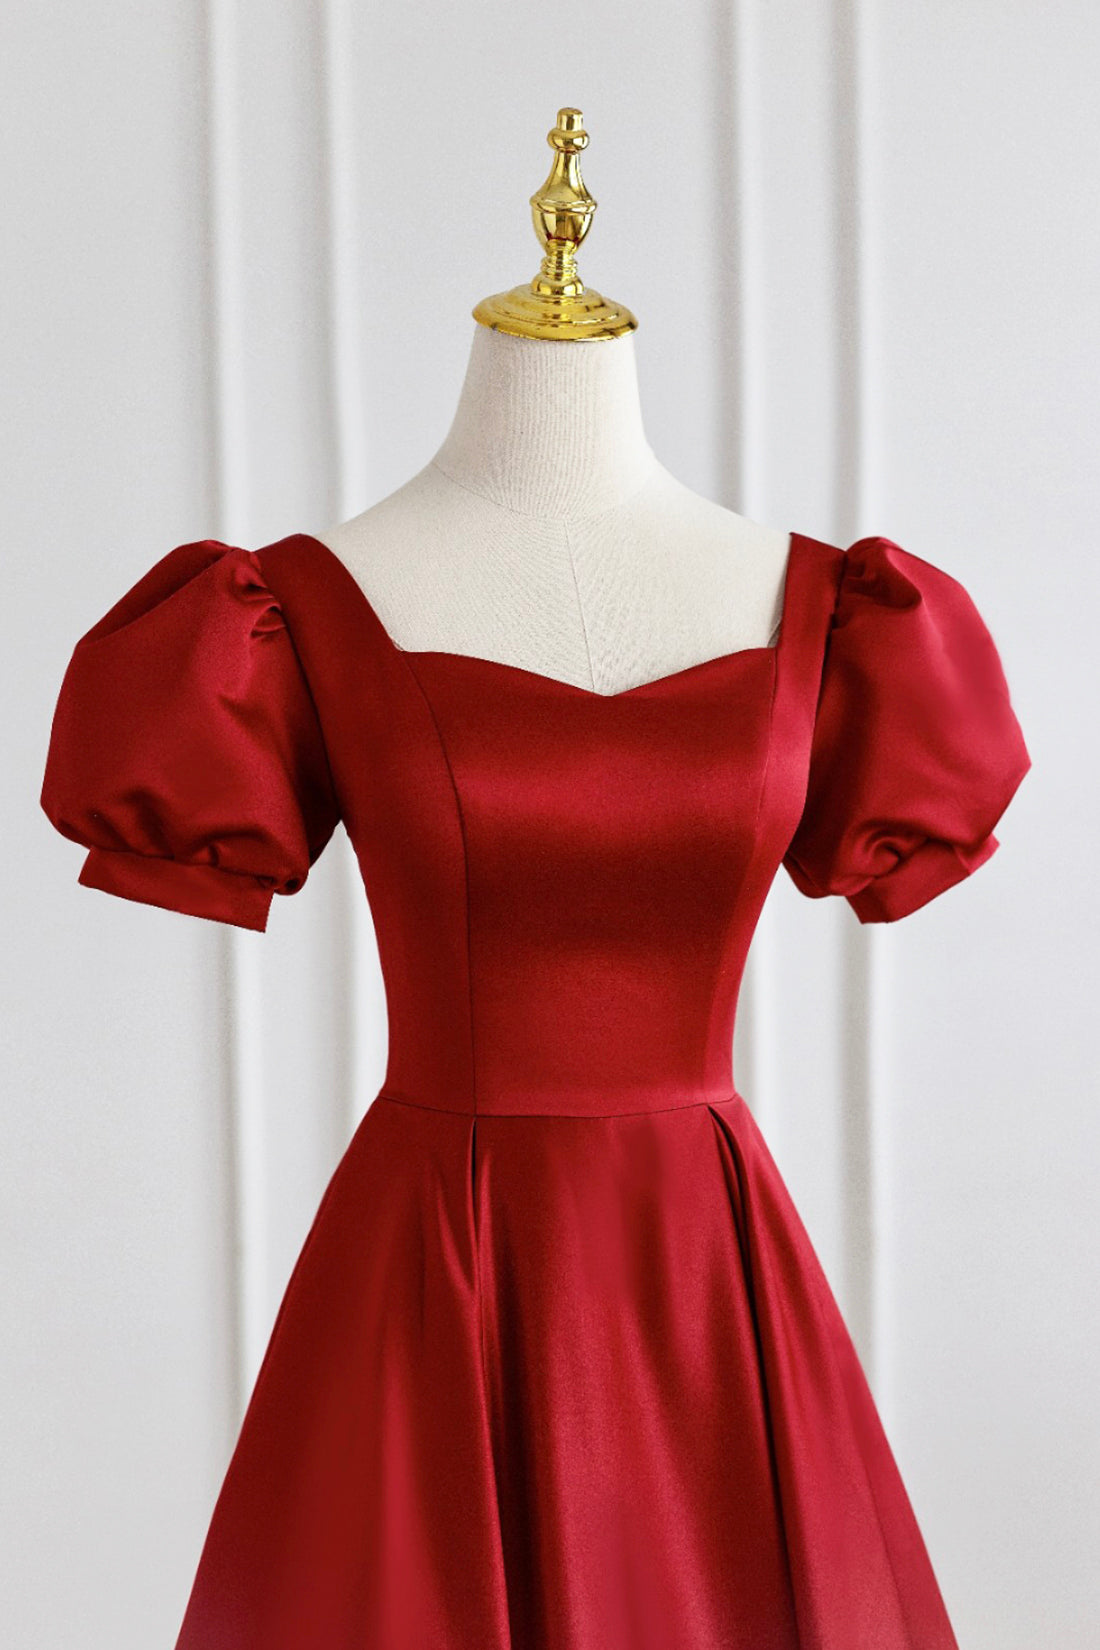 Formal Dresses Summer, Red Satin Long Prom Dress, Simple A-Line Short Sleeve Evening Party Dress